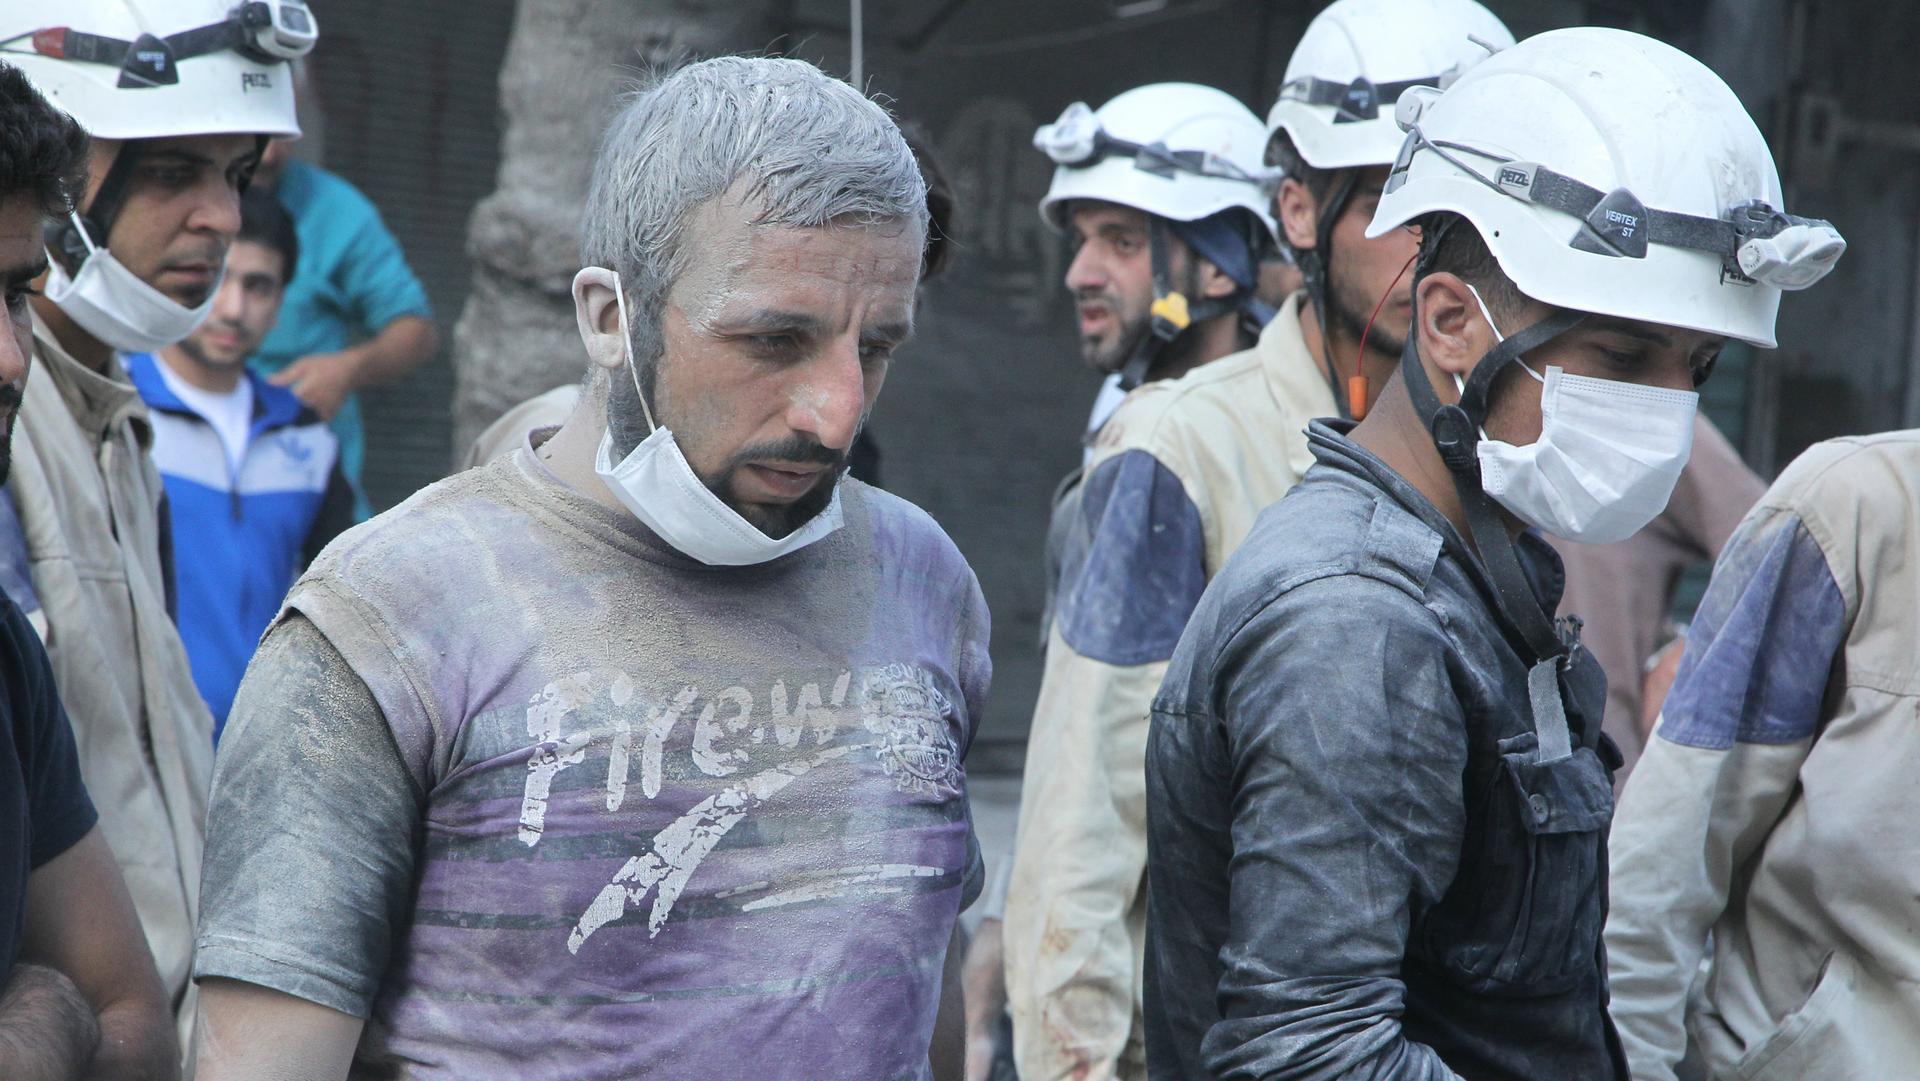 Residents and members of the Syrian Civil Defense, or "White Helmets," look for survivors at a damaged site after what activists said was a barrel bomb dropped by forces loyal to Syria's President Bashar al-Assad in the Al-Shaar neighborhood of Aleppo, Sy